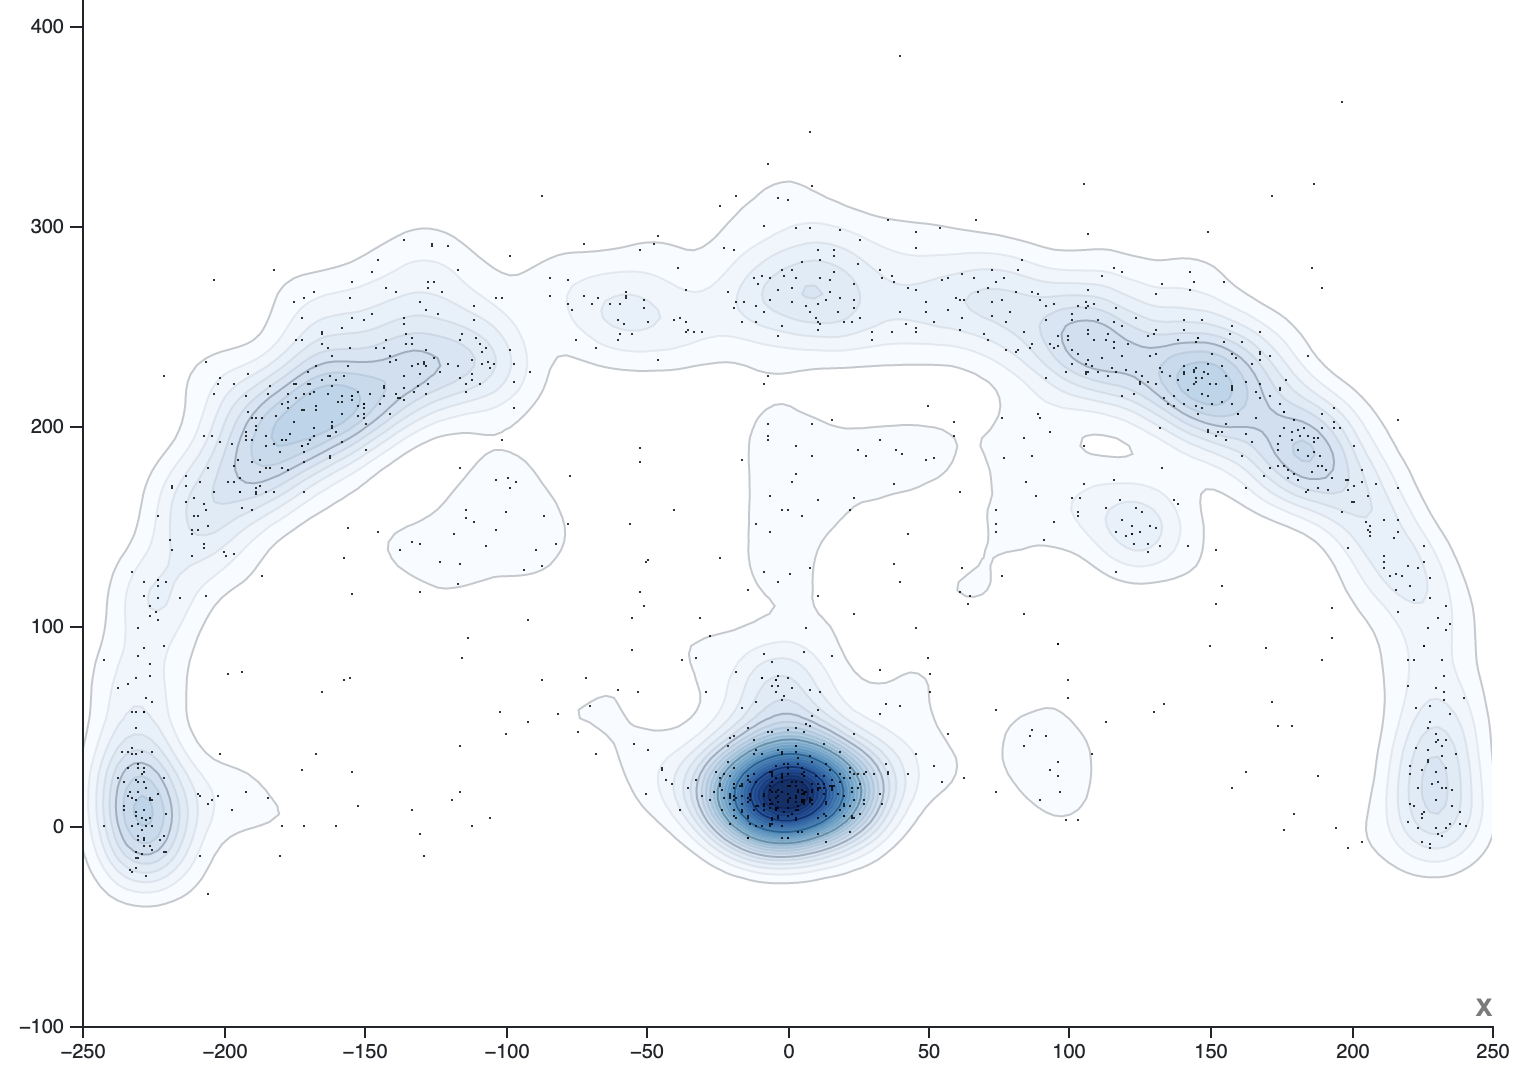 A contour plot of the same data, revealing the patterns in the data